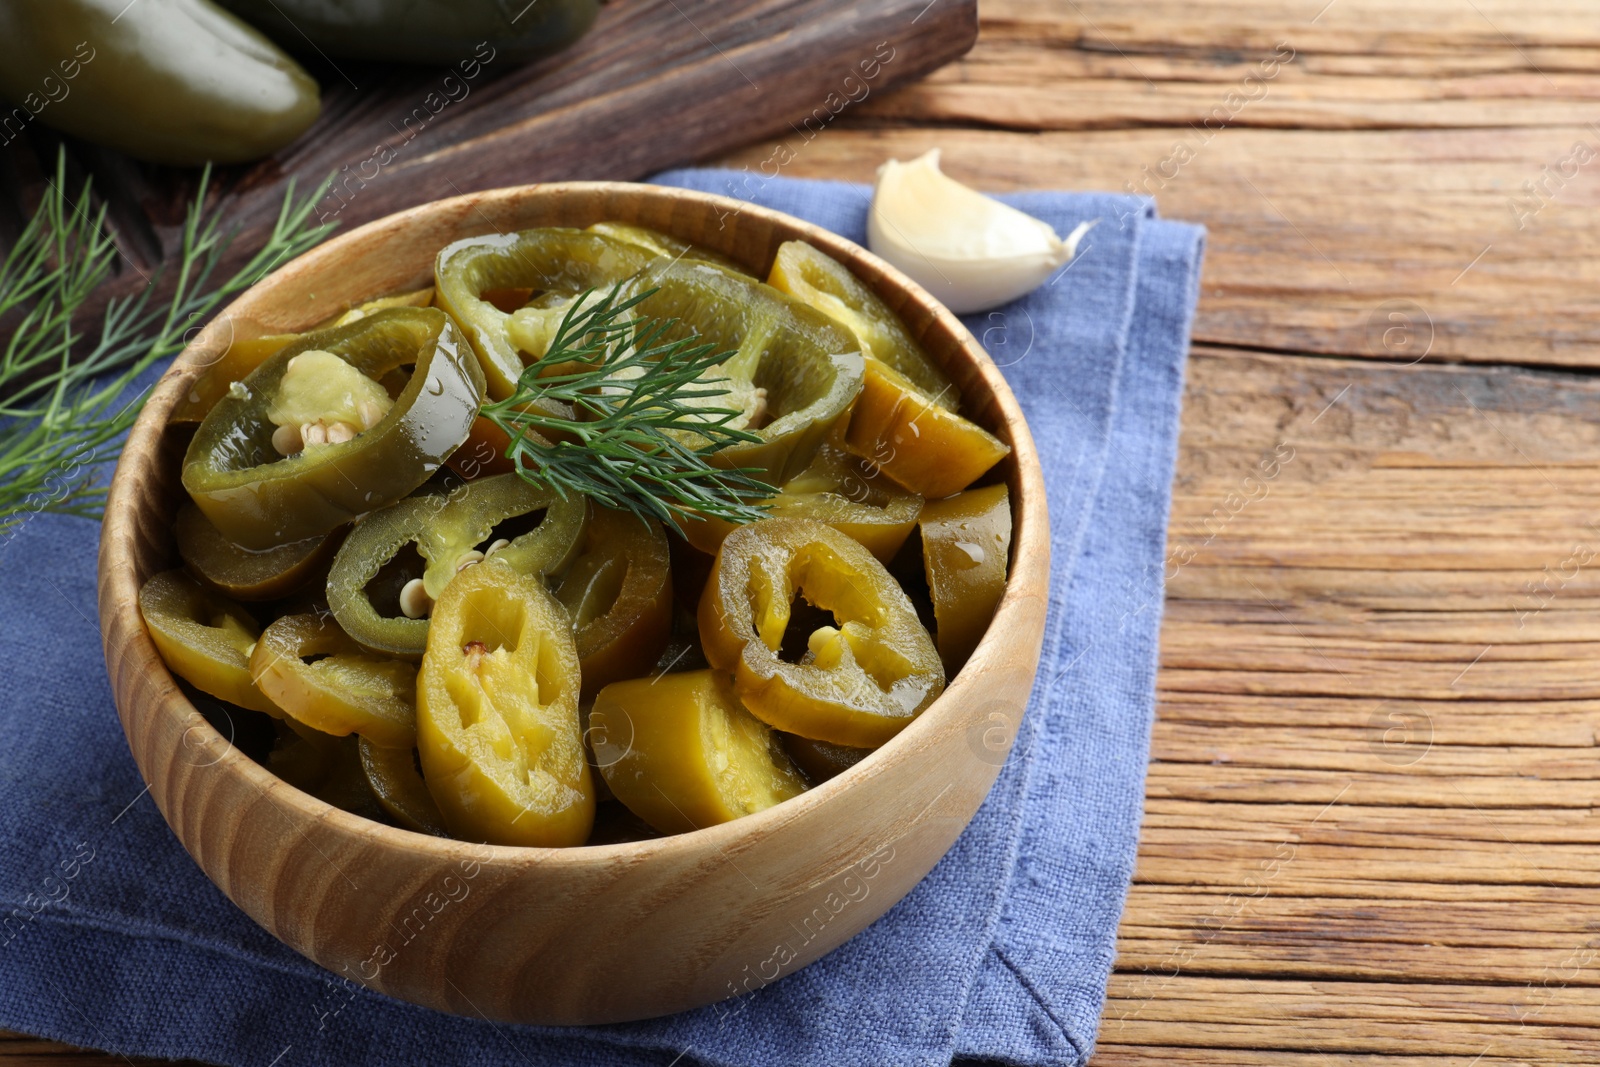 Photo of Bowl with slices of pickled green jalapeno peppers on wooden table, space for text